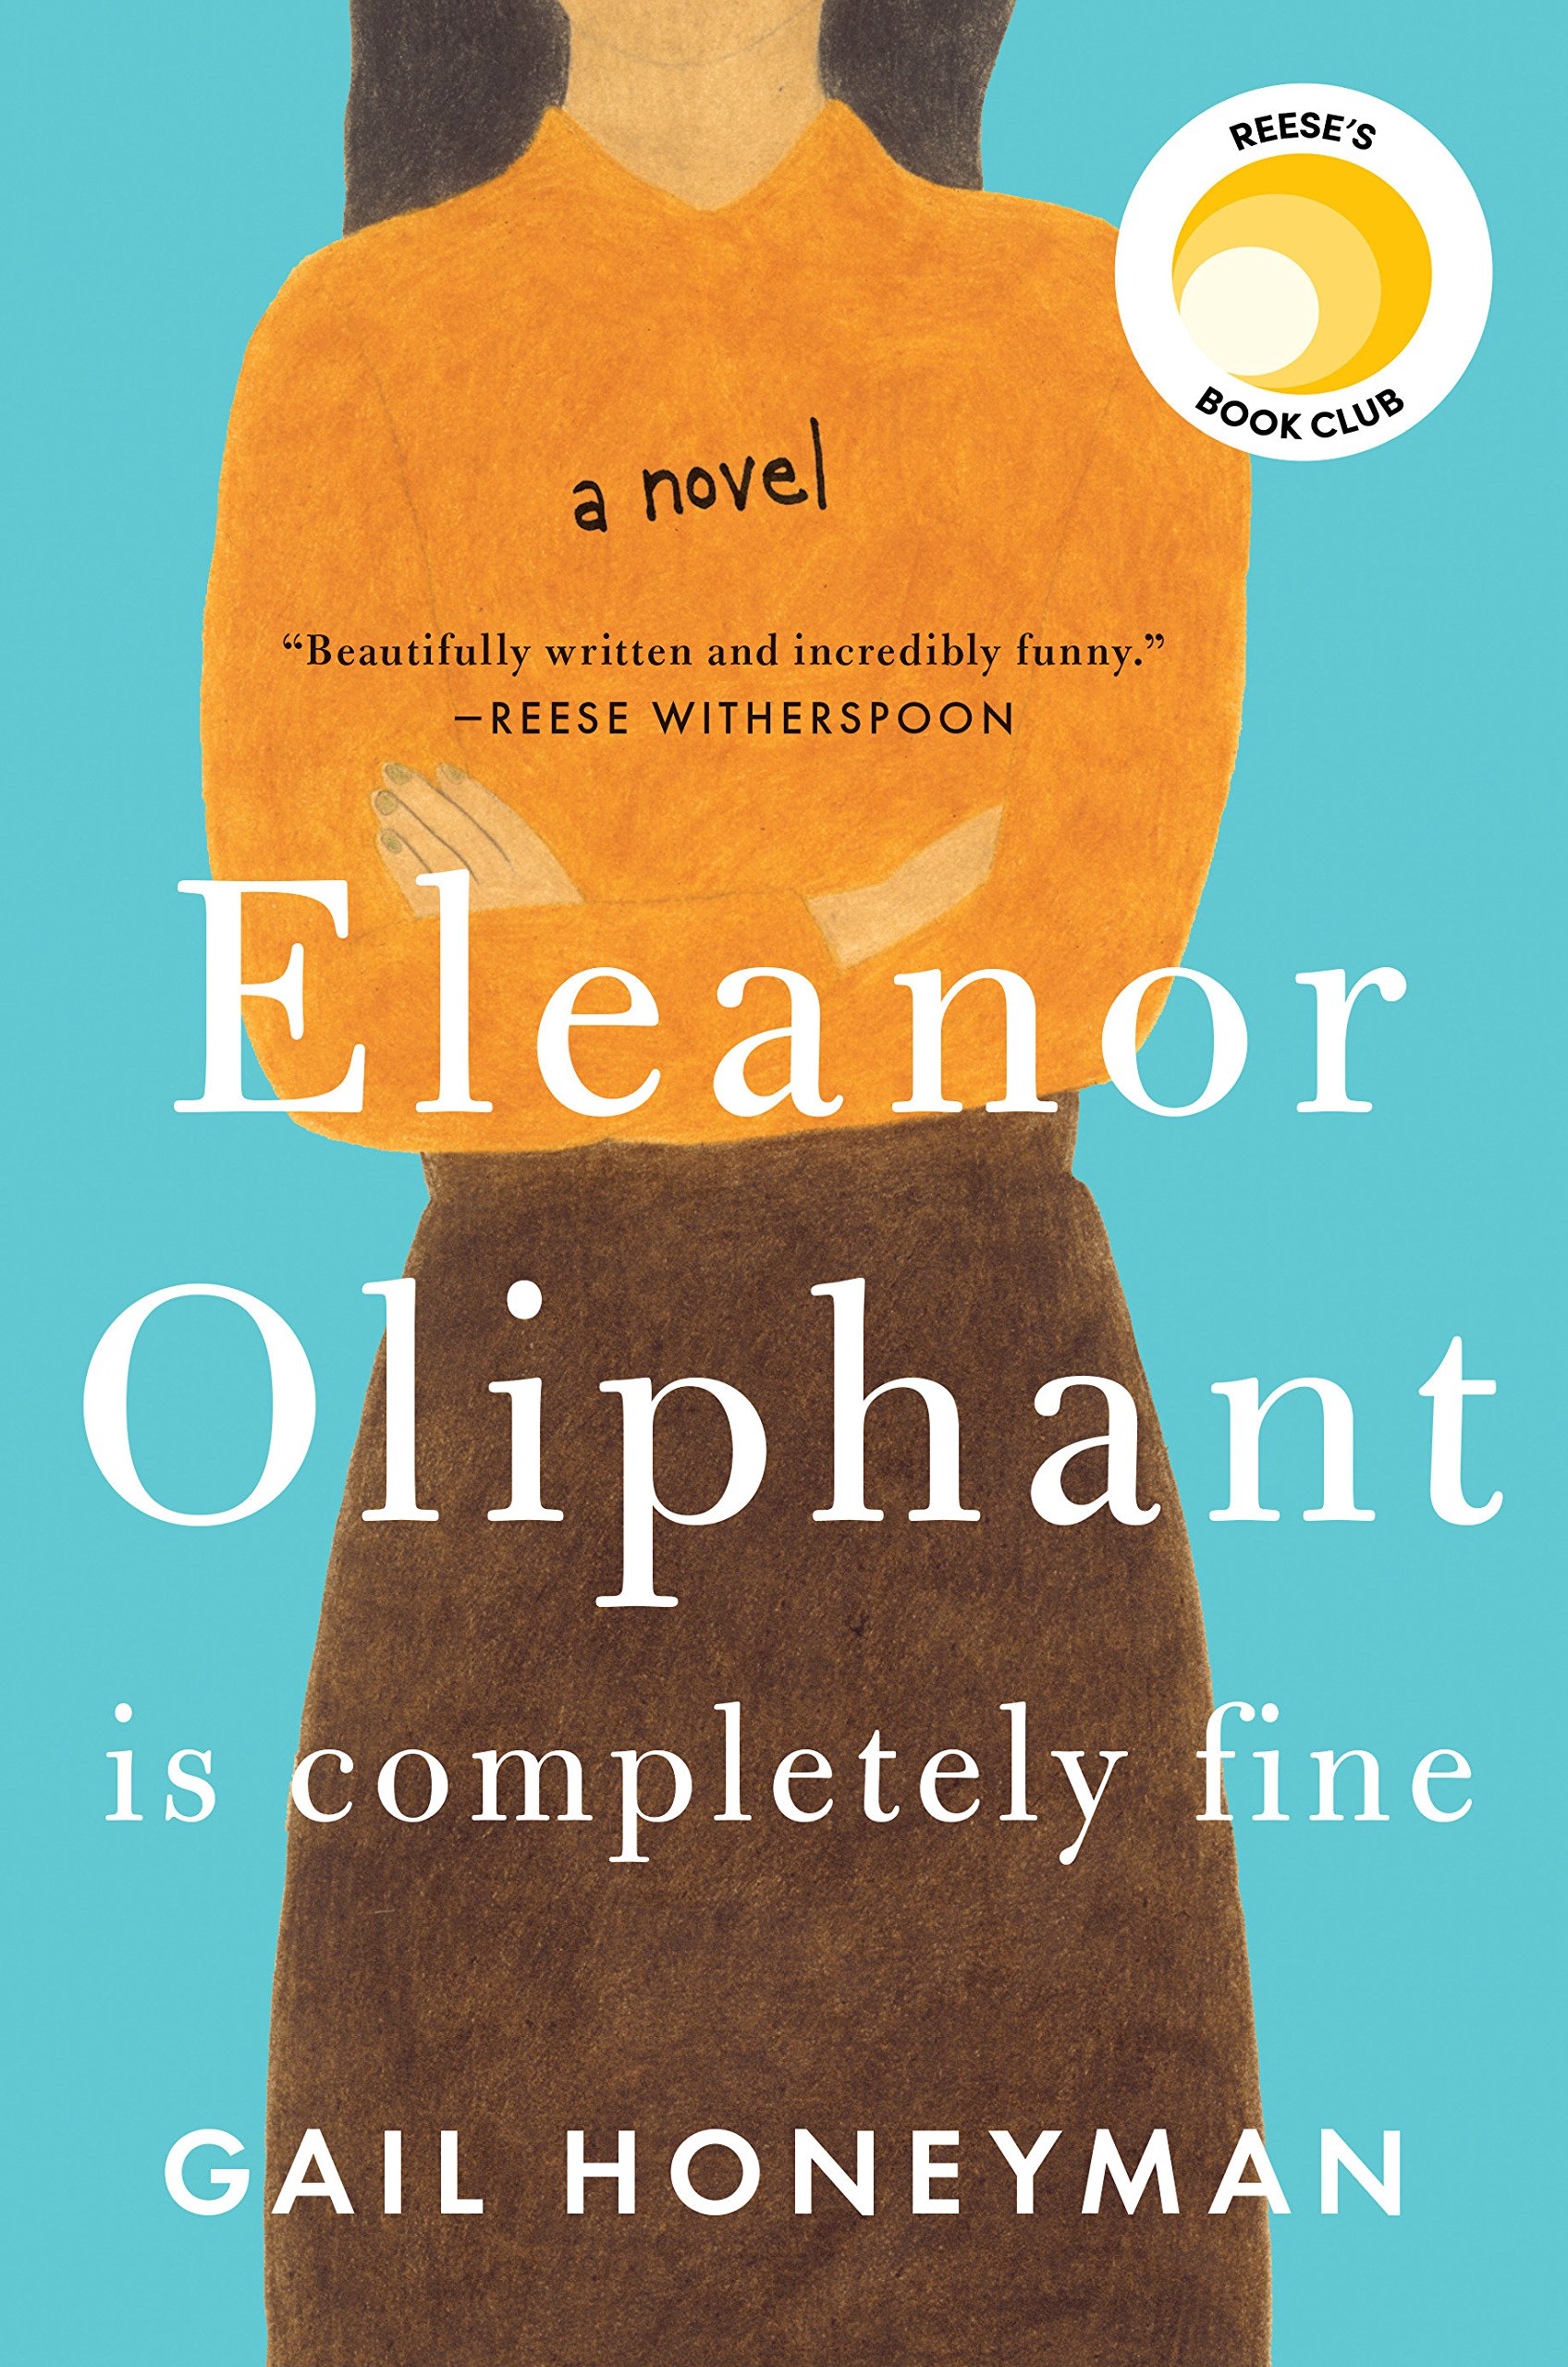 Cover of Eleanor Oliphant Is Completely Fine by Gail Honeyman